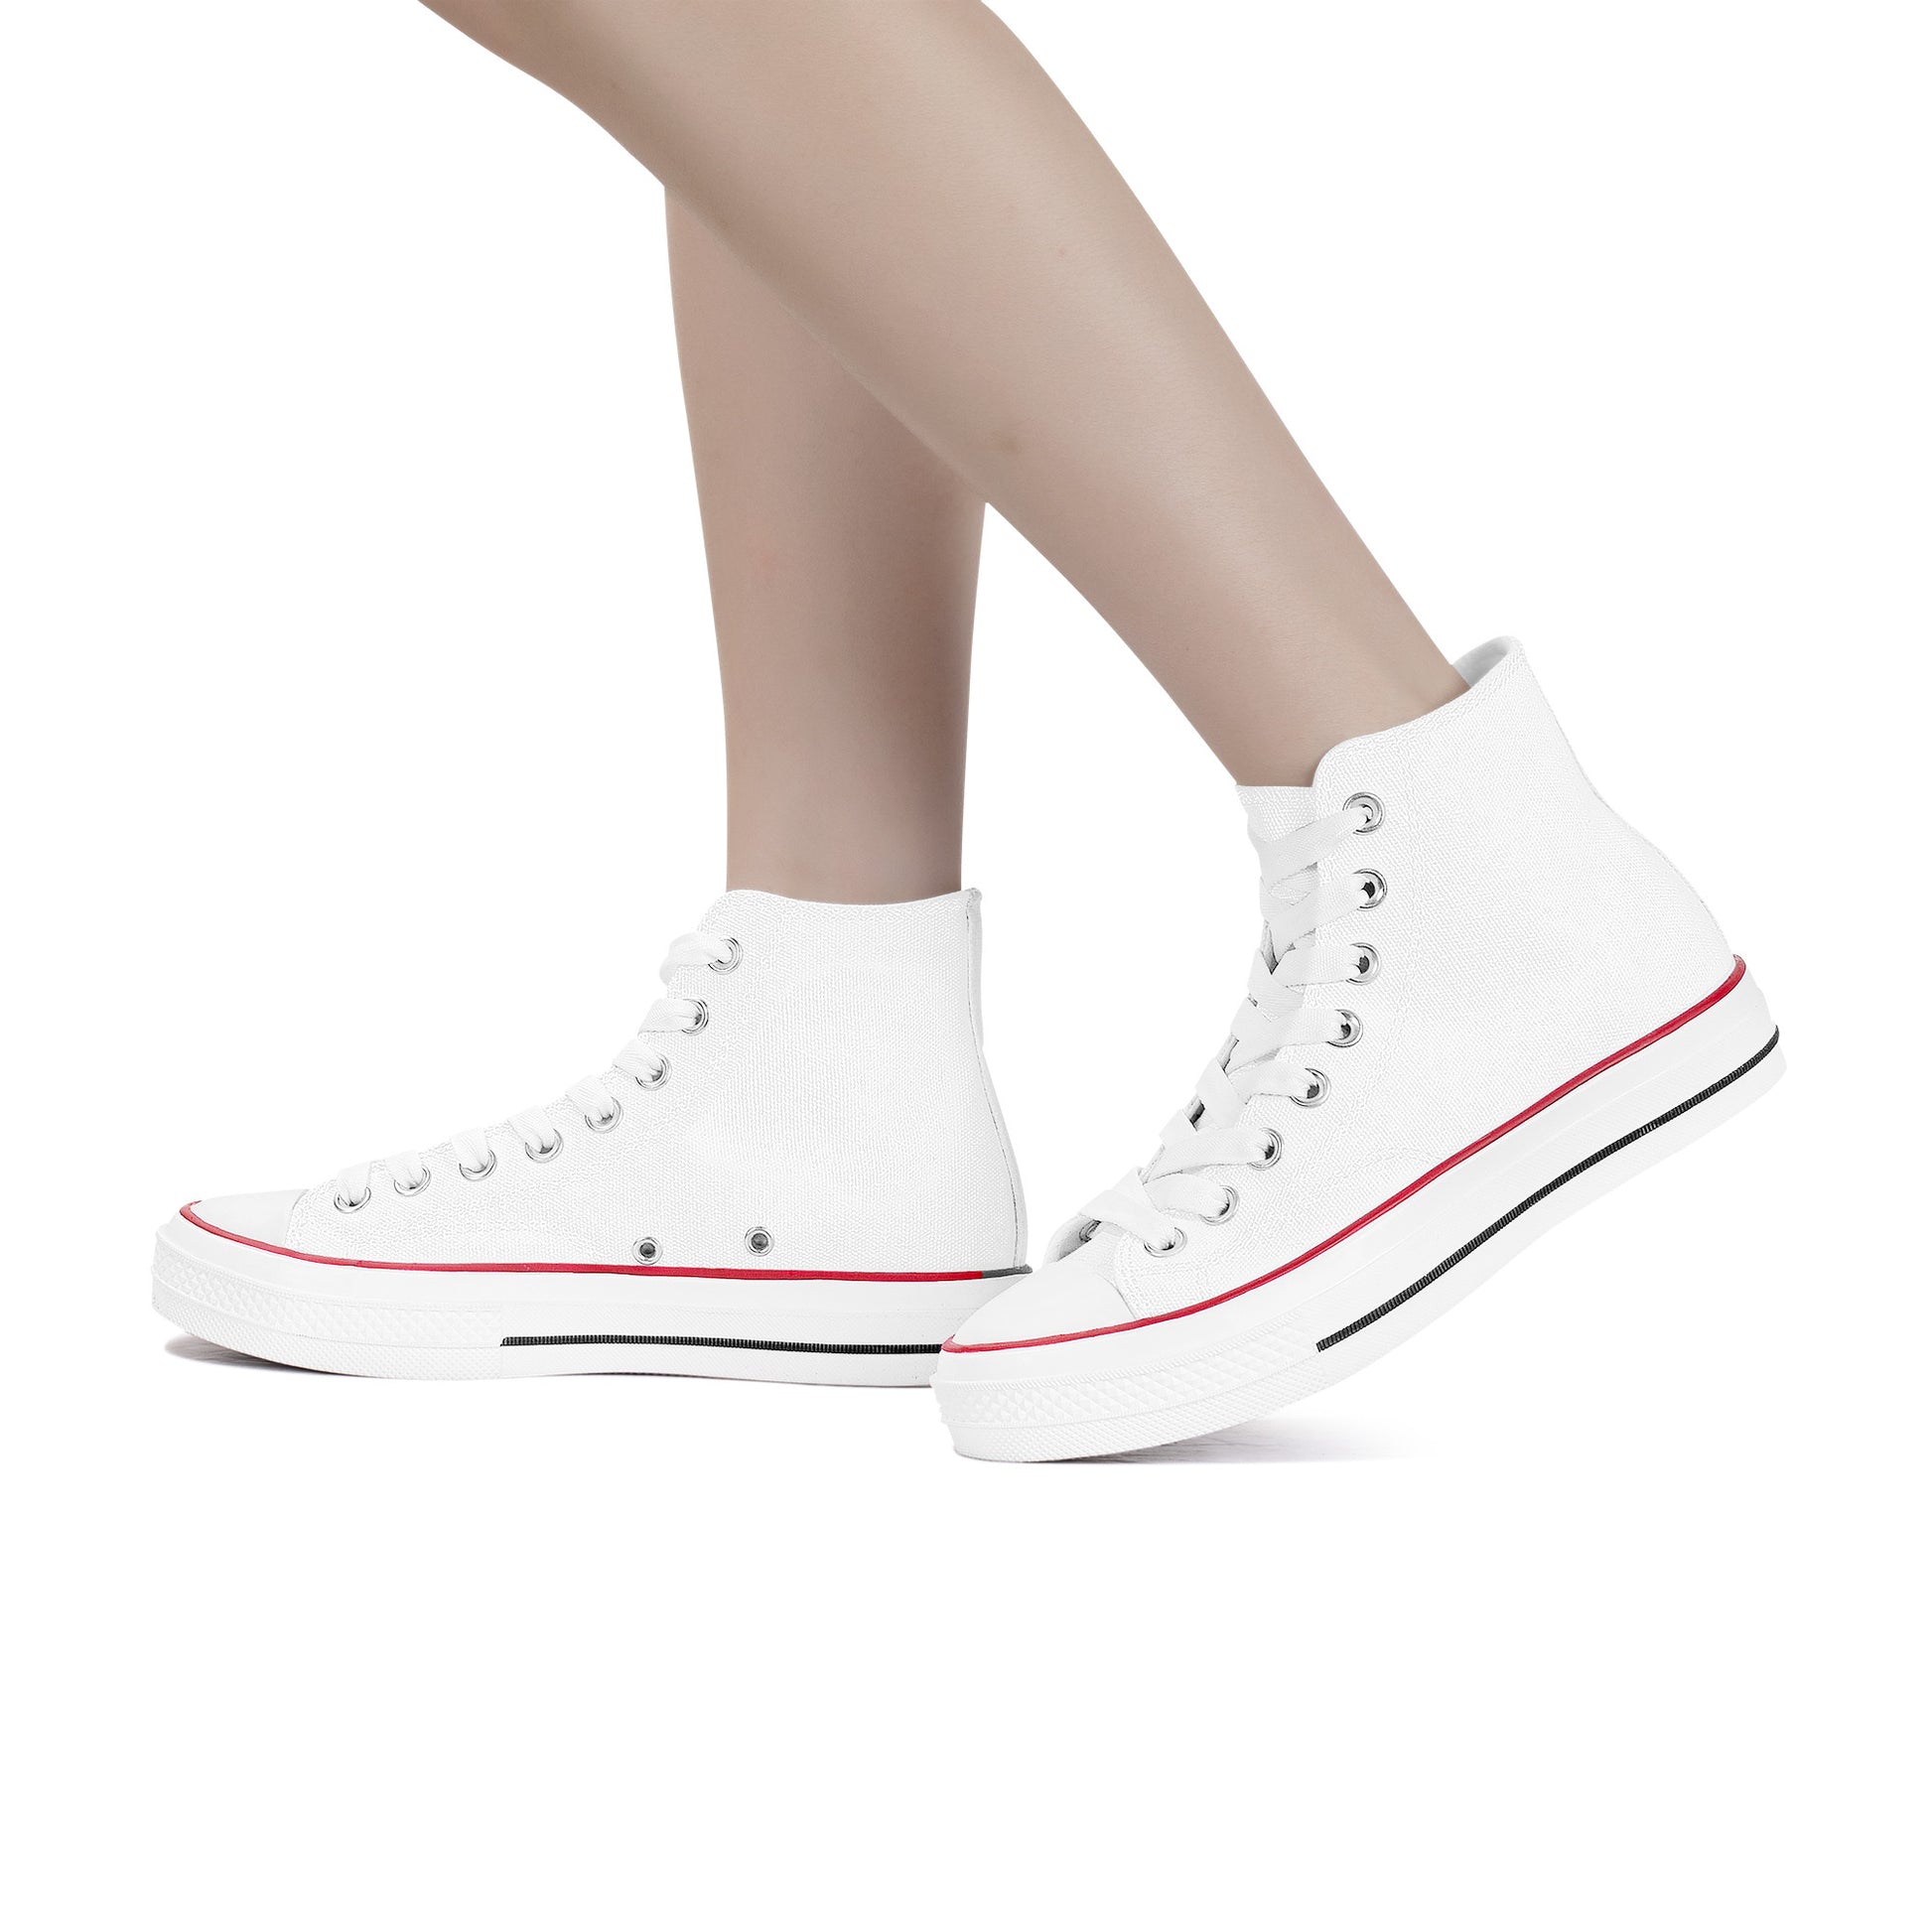 Create Your Own - High Top Canvas Shoes - White - HayGoodies - Canvas Shoes